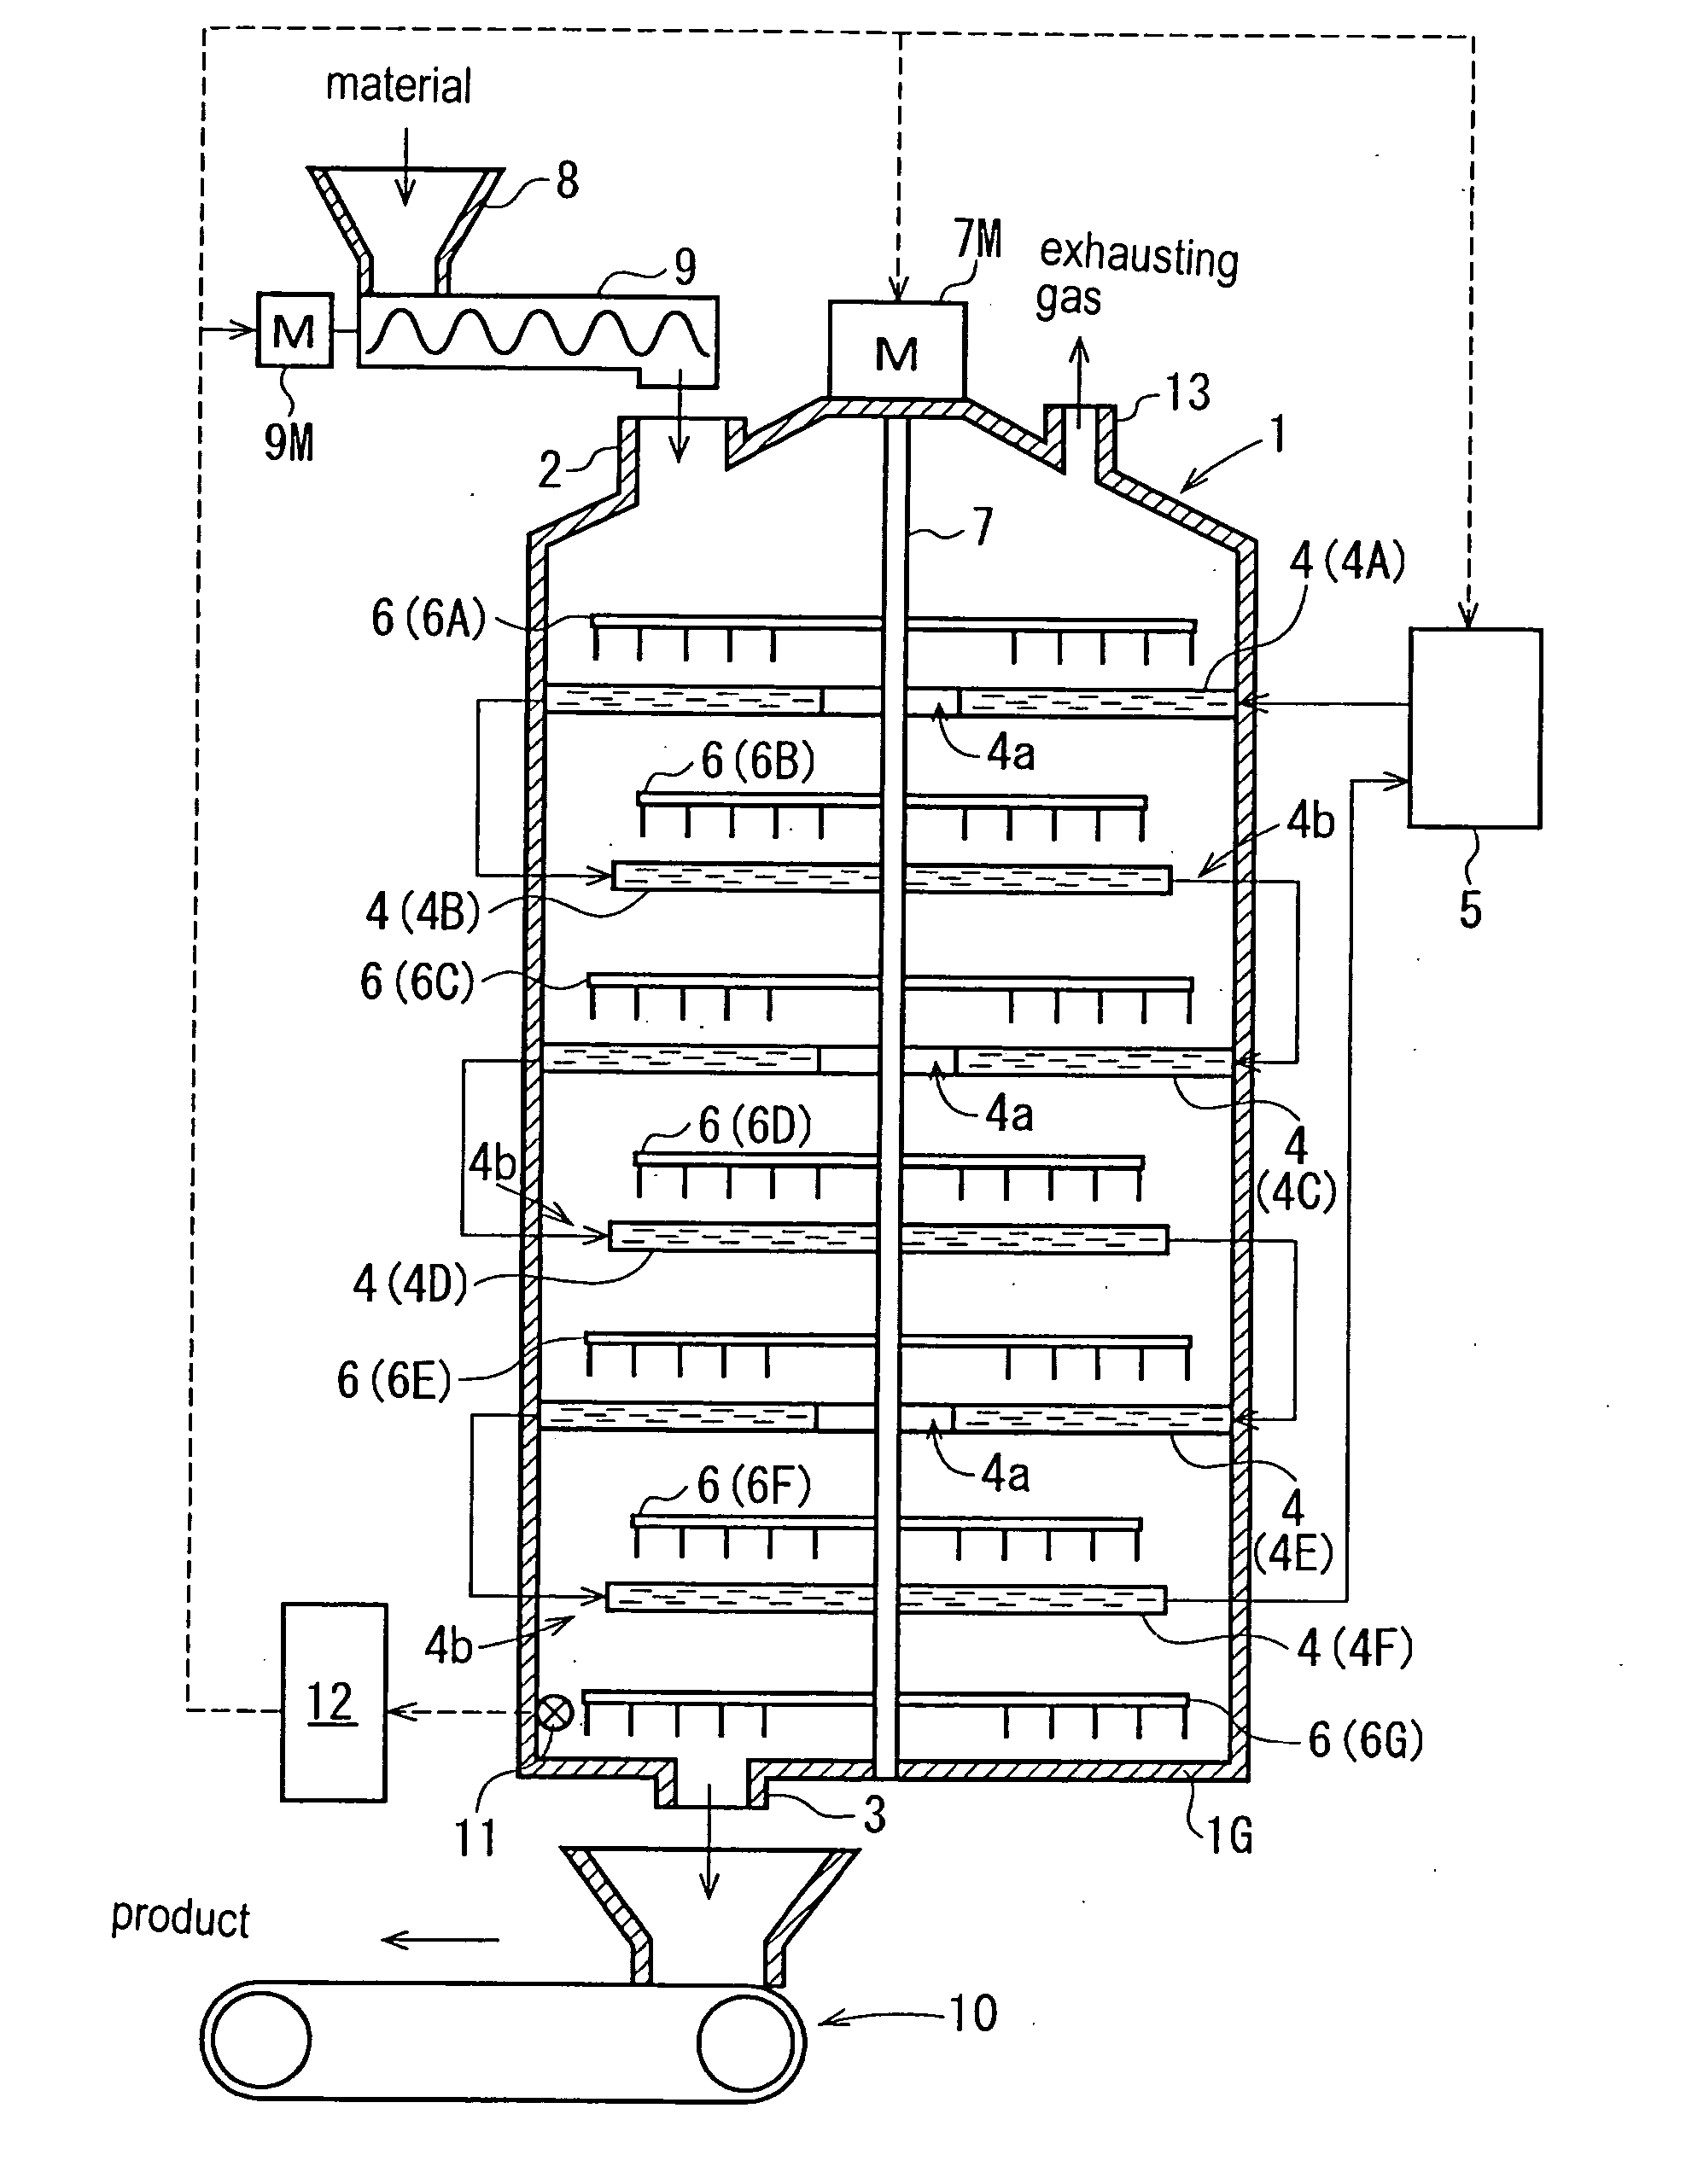 Apparatus and method for producing matured compost-like material